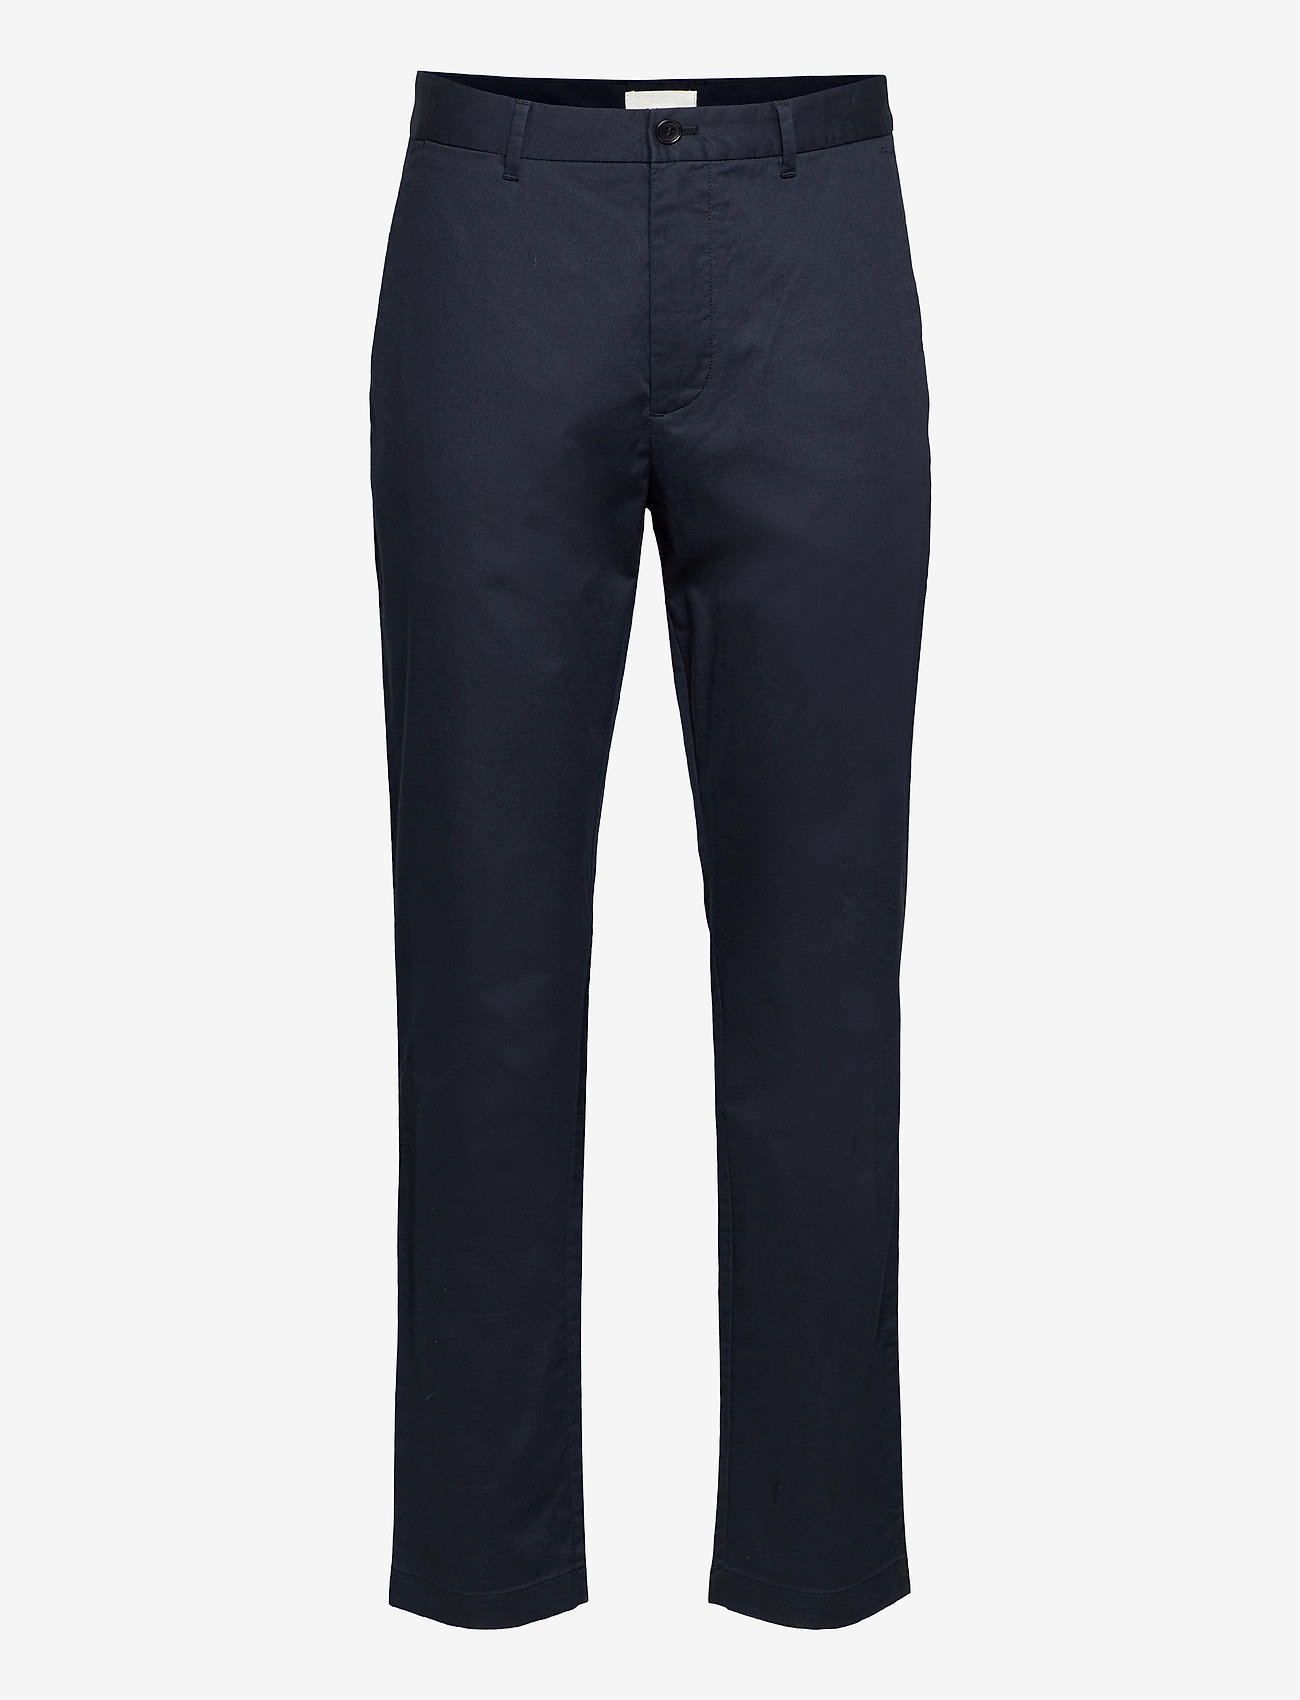 Wood Wood - Marcus light twill trousers - chinos - navy - 0